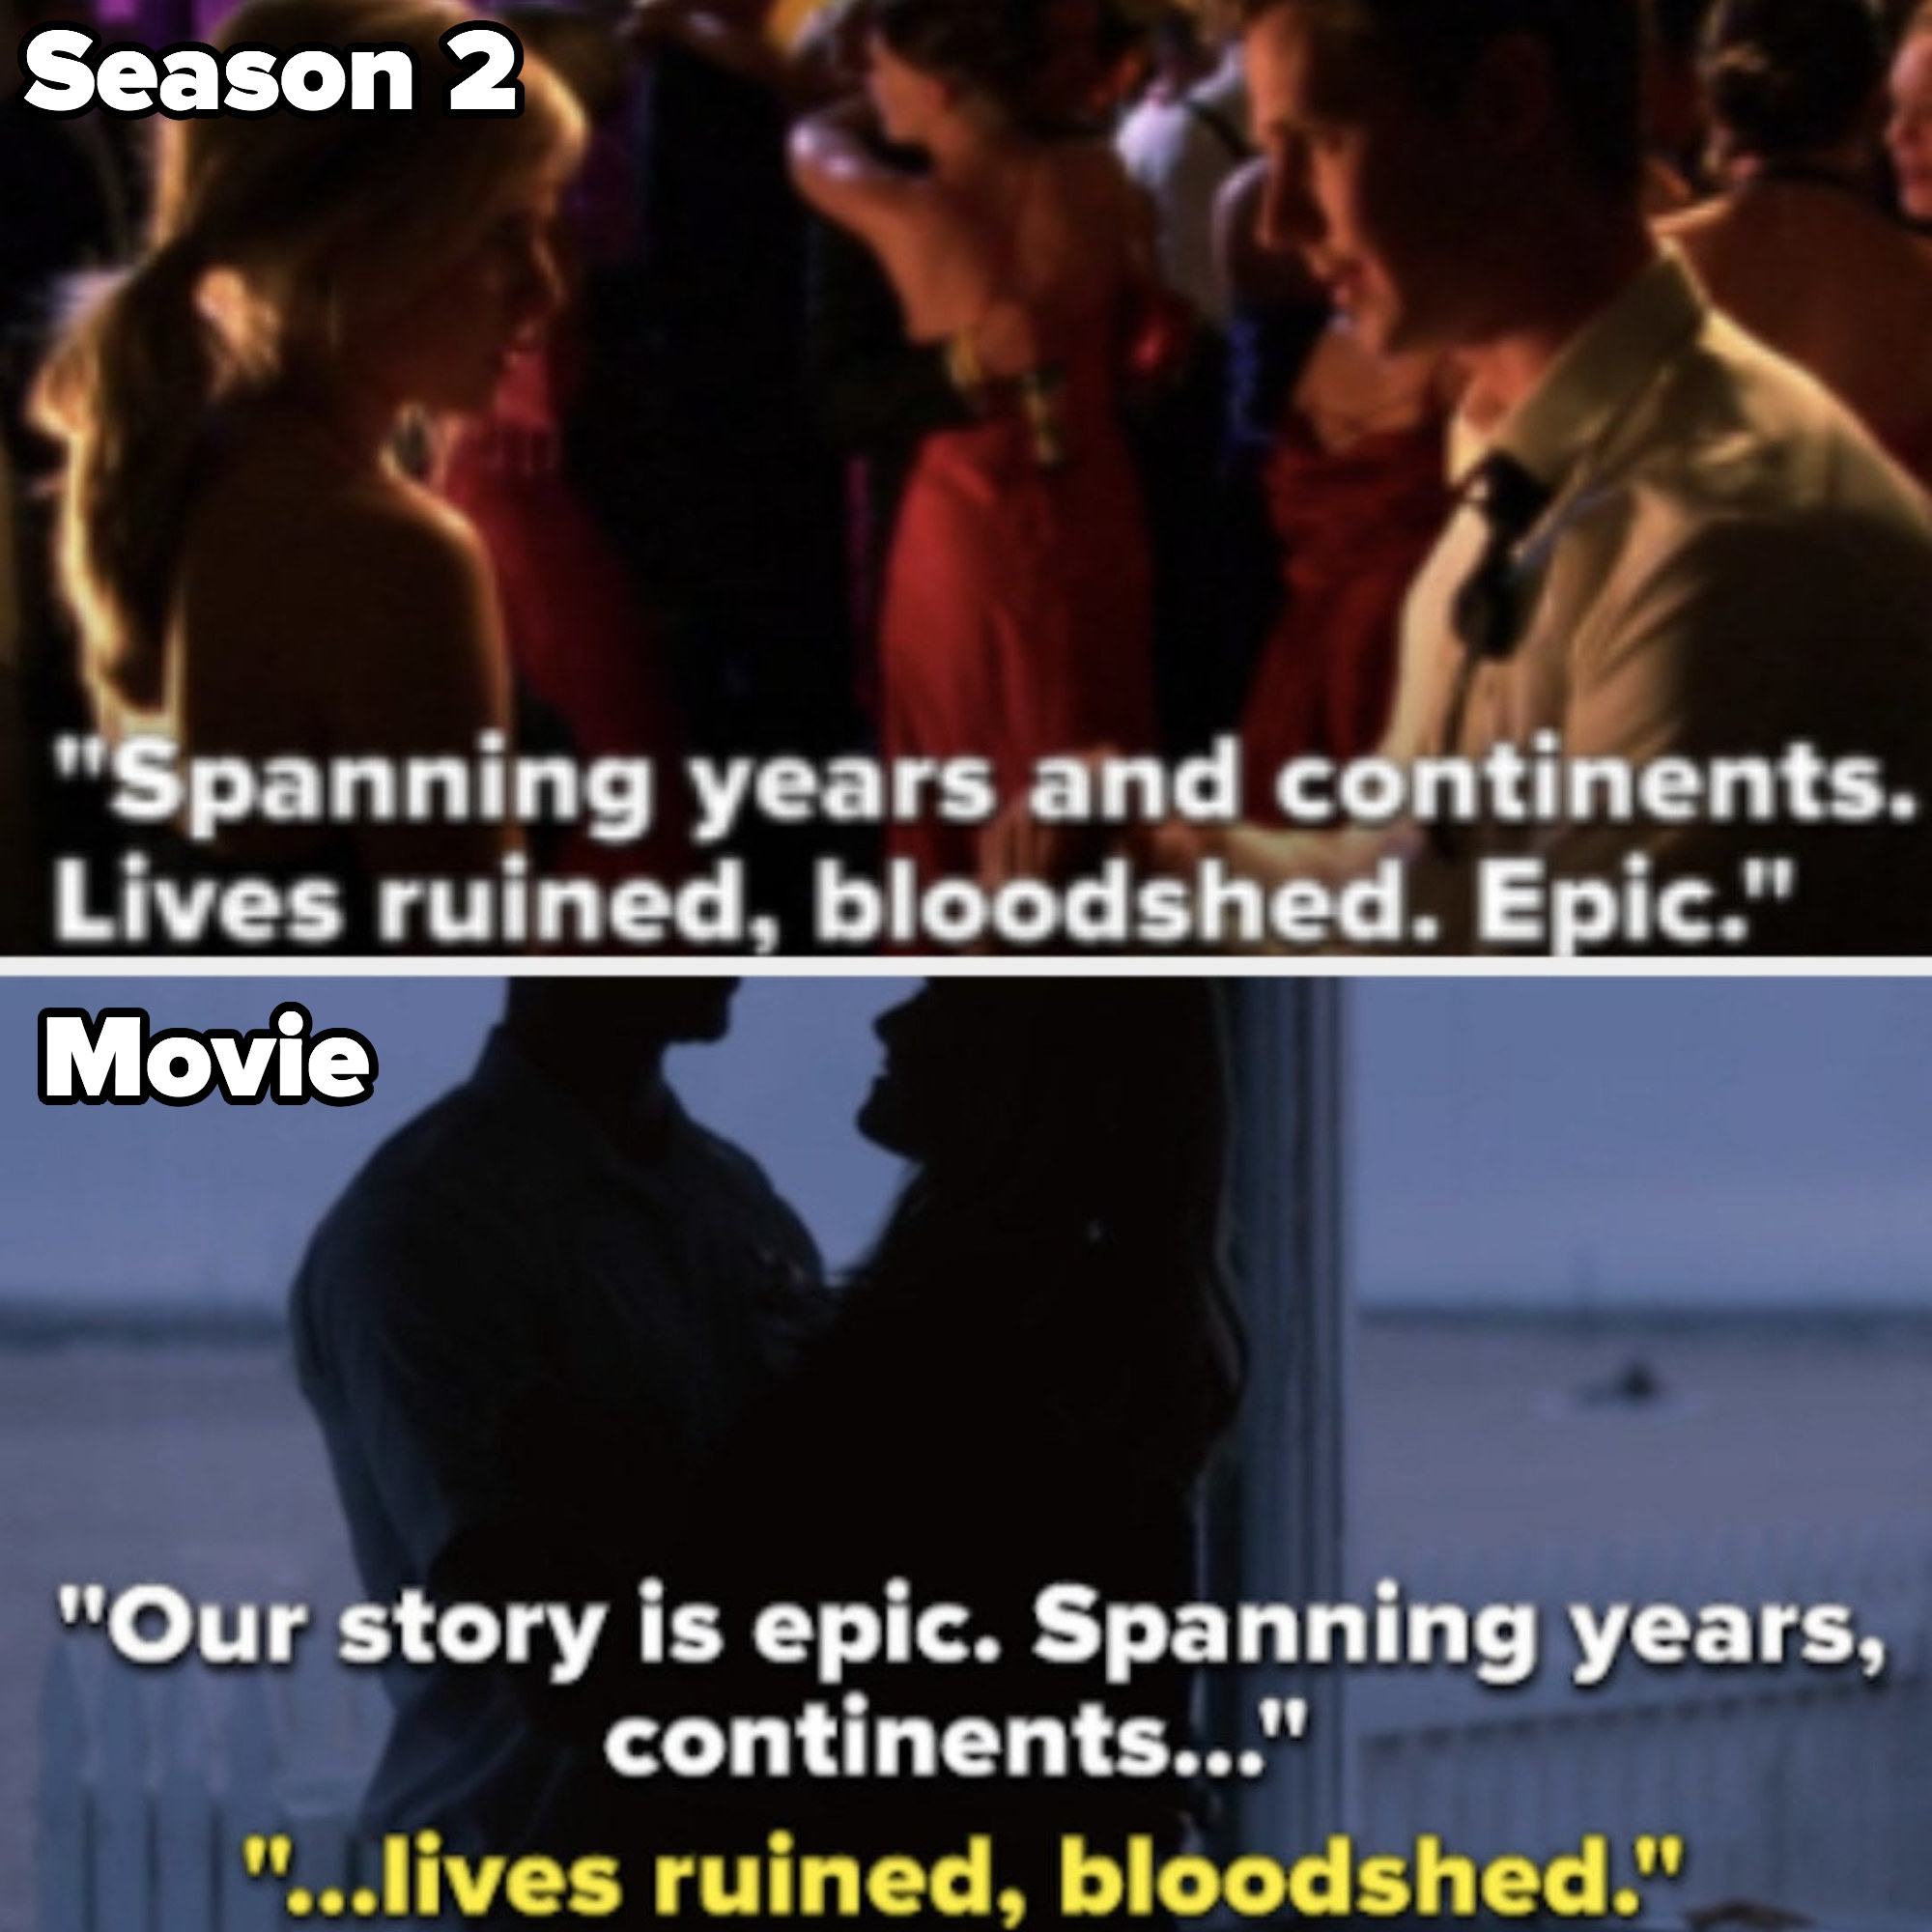 Season 2: &quot;Spanning years and continents, lives ruined bloodshed, epic,&quot; movie: &quot;our story is epic, spanning years, continents...&quot;